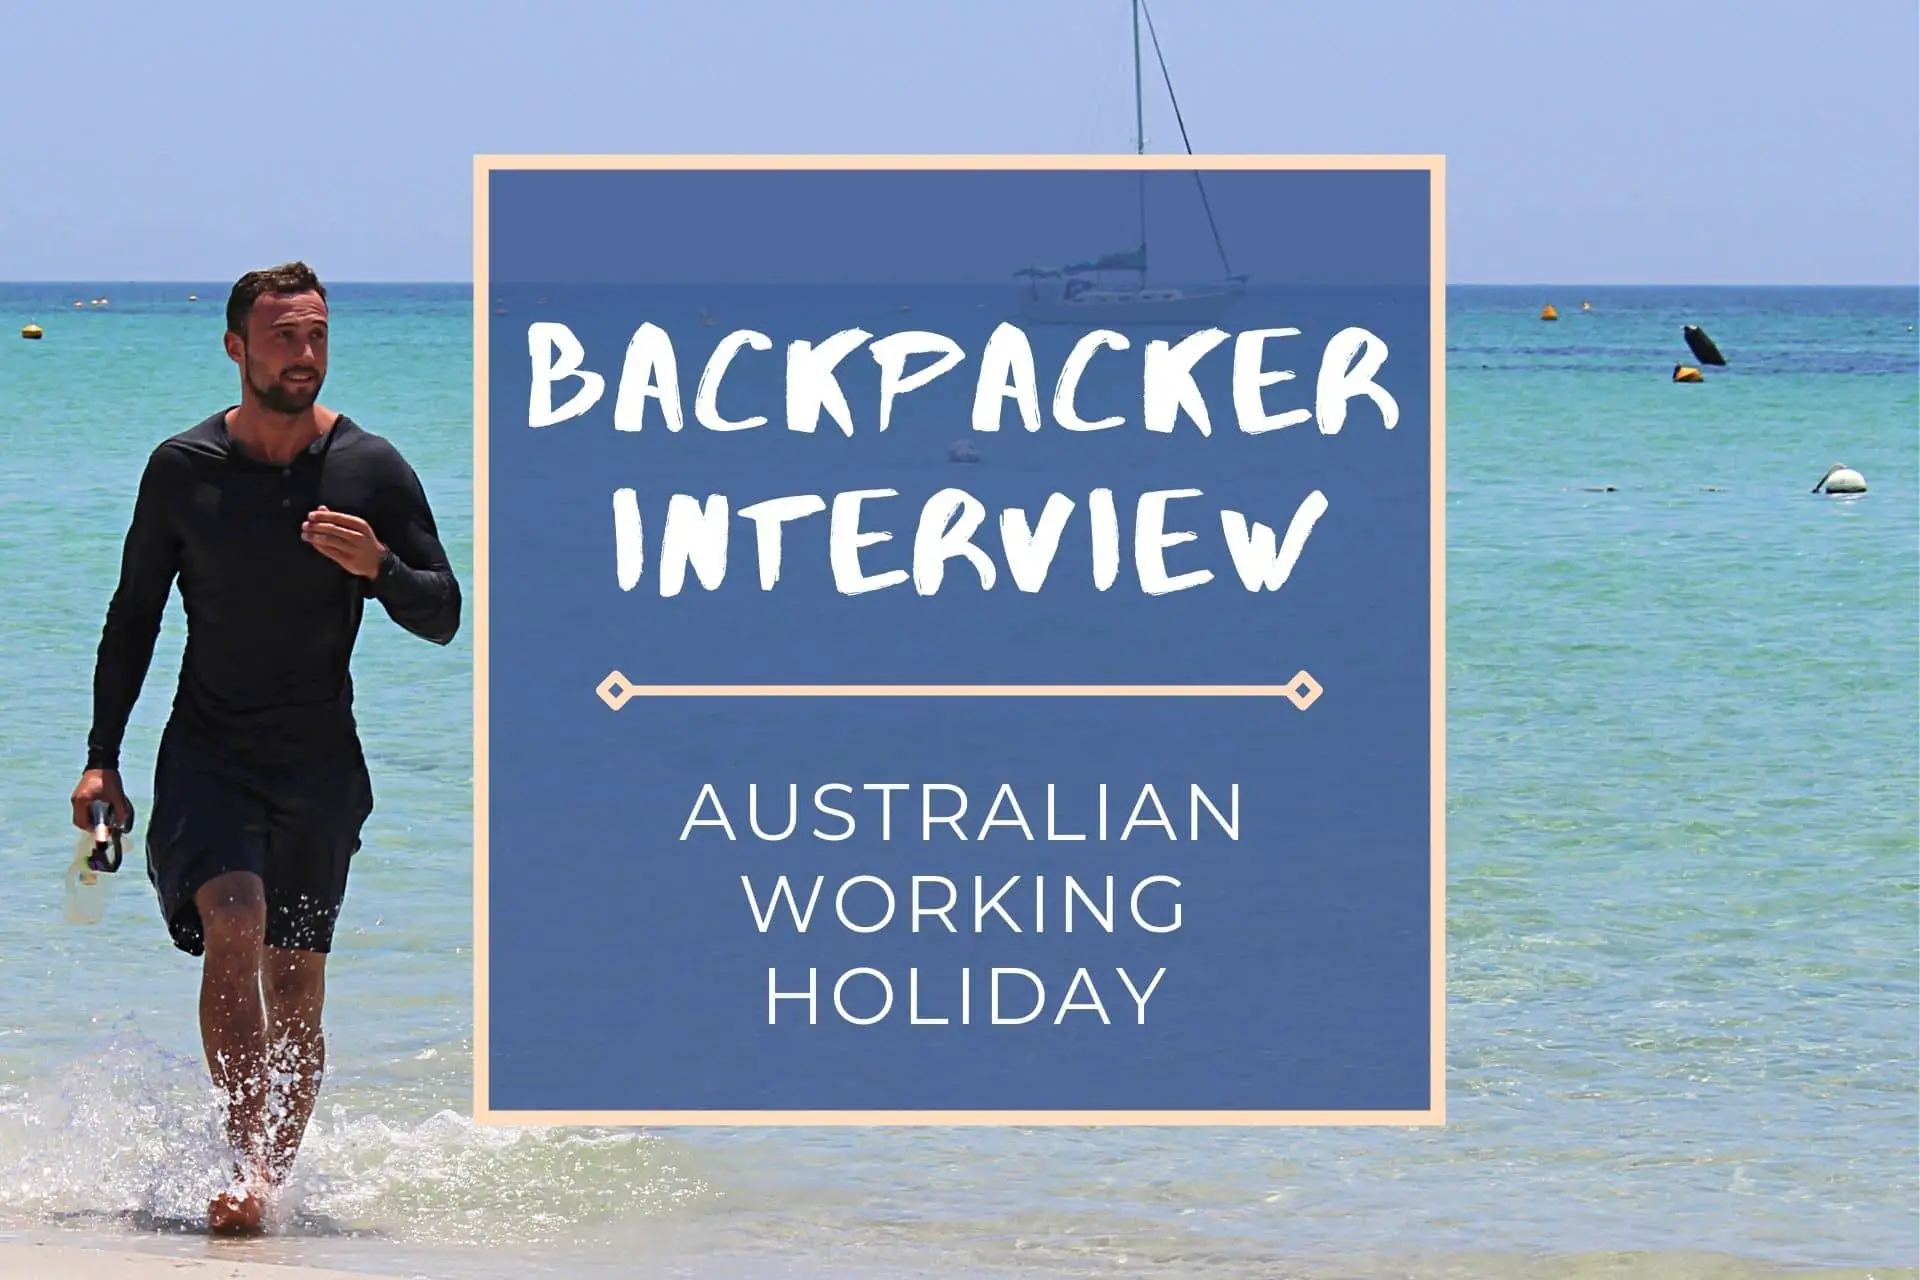 A backpacker's Australian working holiday visa experience: working in construction in Australia, how to find work in Australia, maintaining fitness on Australian road trips, Australia highlights and finding farm work for the second year visa.